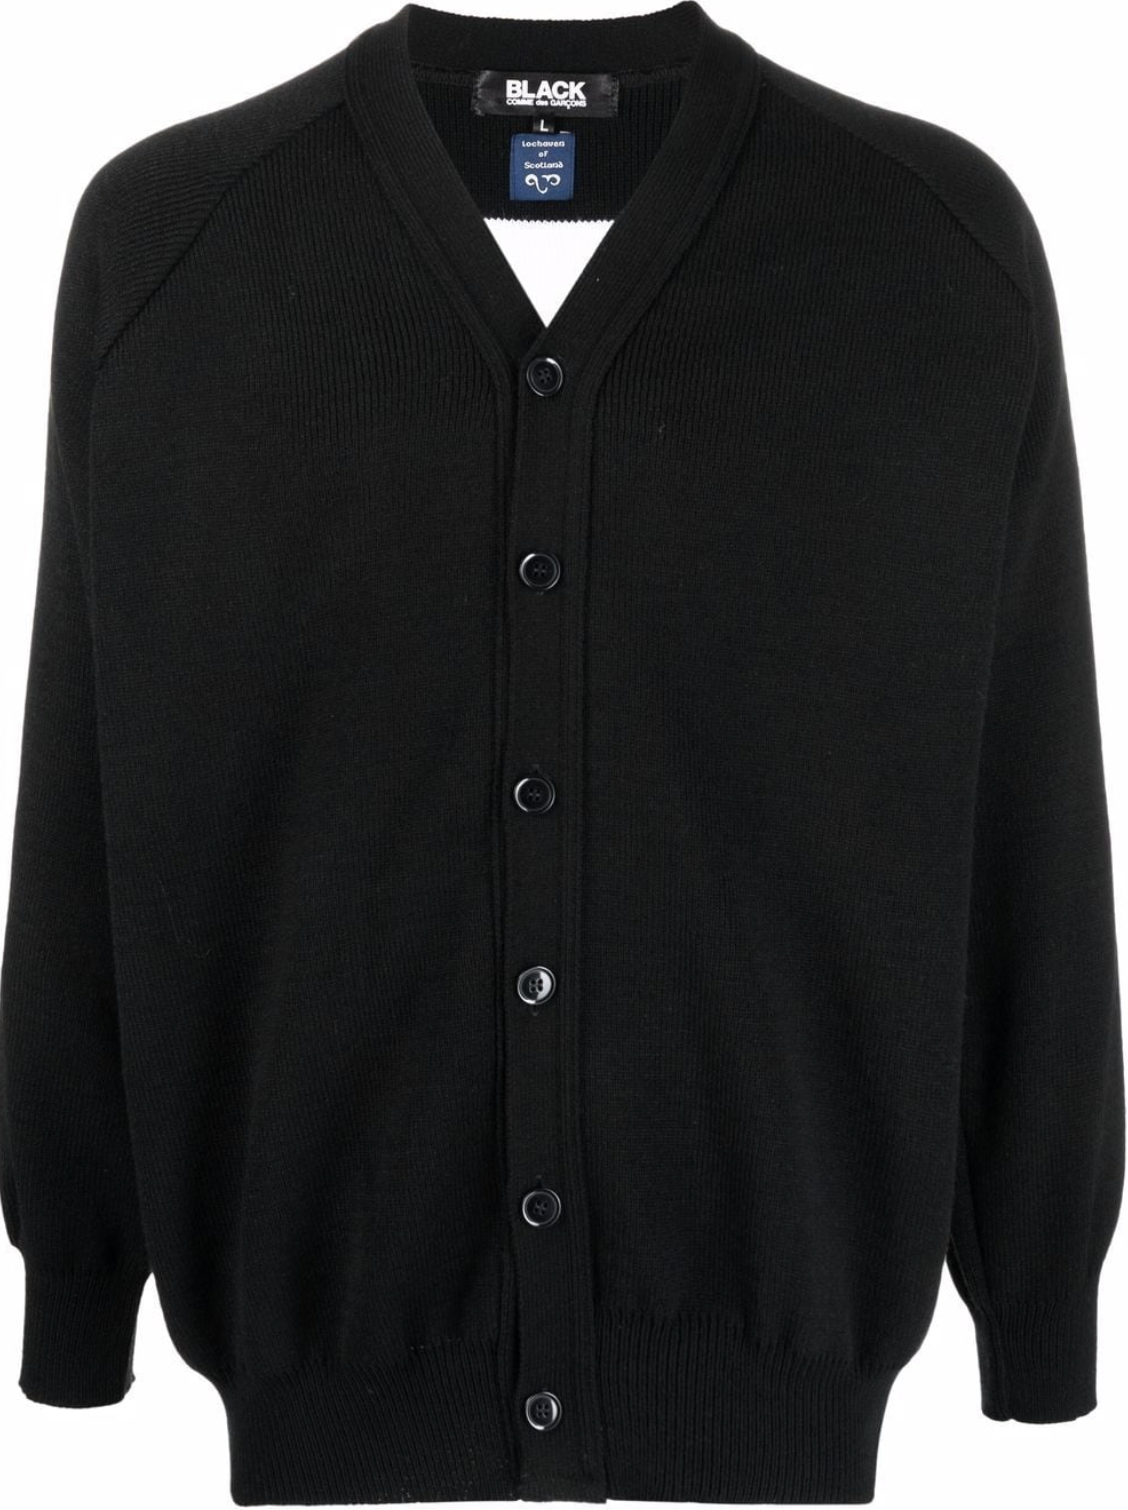 How to wear a black cardigan stylishly? Pick up men's coordination